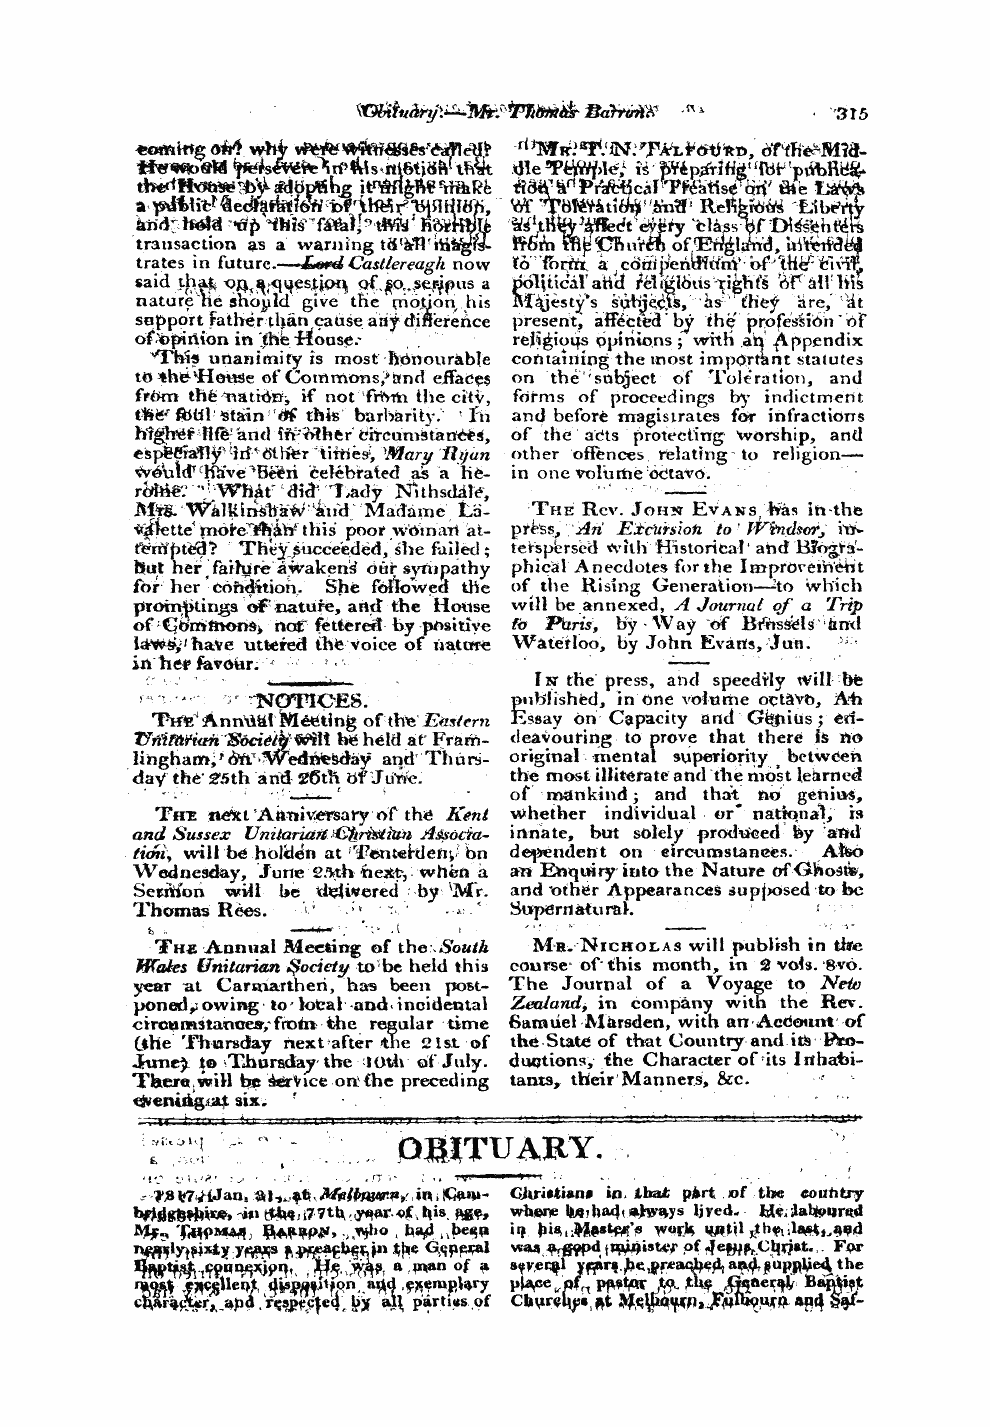 Monthly Repository (1806-1838) and Unitarian Chronicle (1832-1833): F Y, 1st edition - ;I| Ajj-Xt-F „ Hi- Ivr ¦ -. -J ¦ I .I U *' " ~ ' '-"T Jr I J^ .&Lt;»^-»— »— »**M-**~M *M~' • M ' ^' — ^' T ; R.I&Gt; "- Omtuary. . :*'. 1 . , /